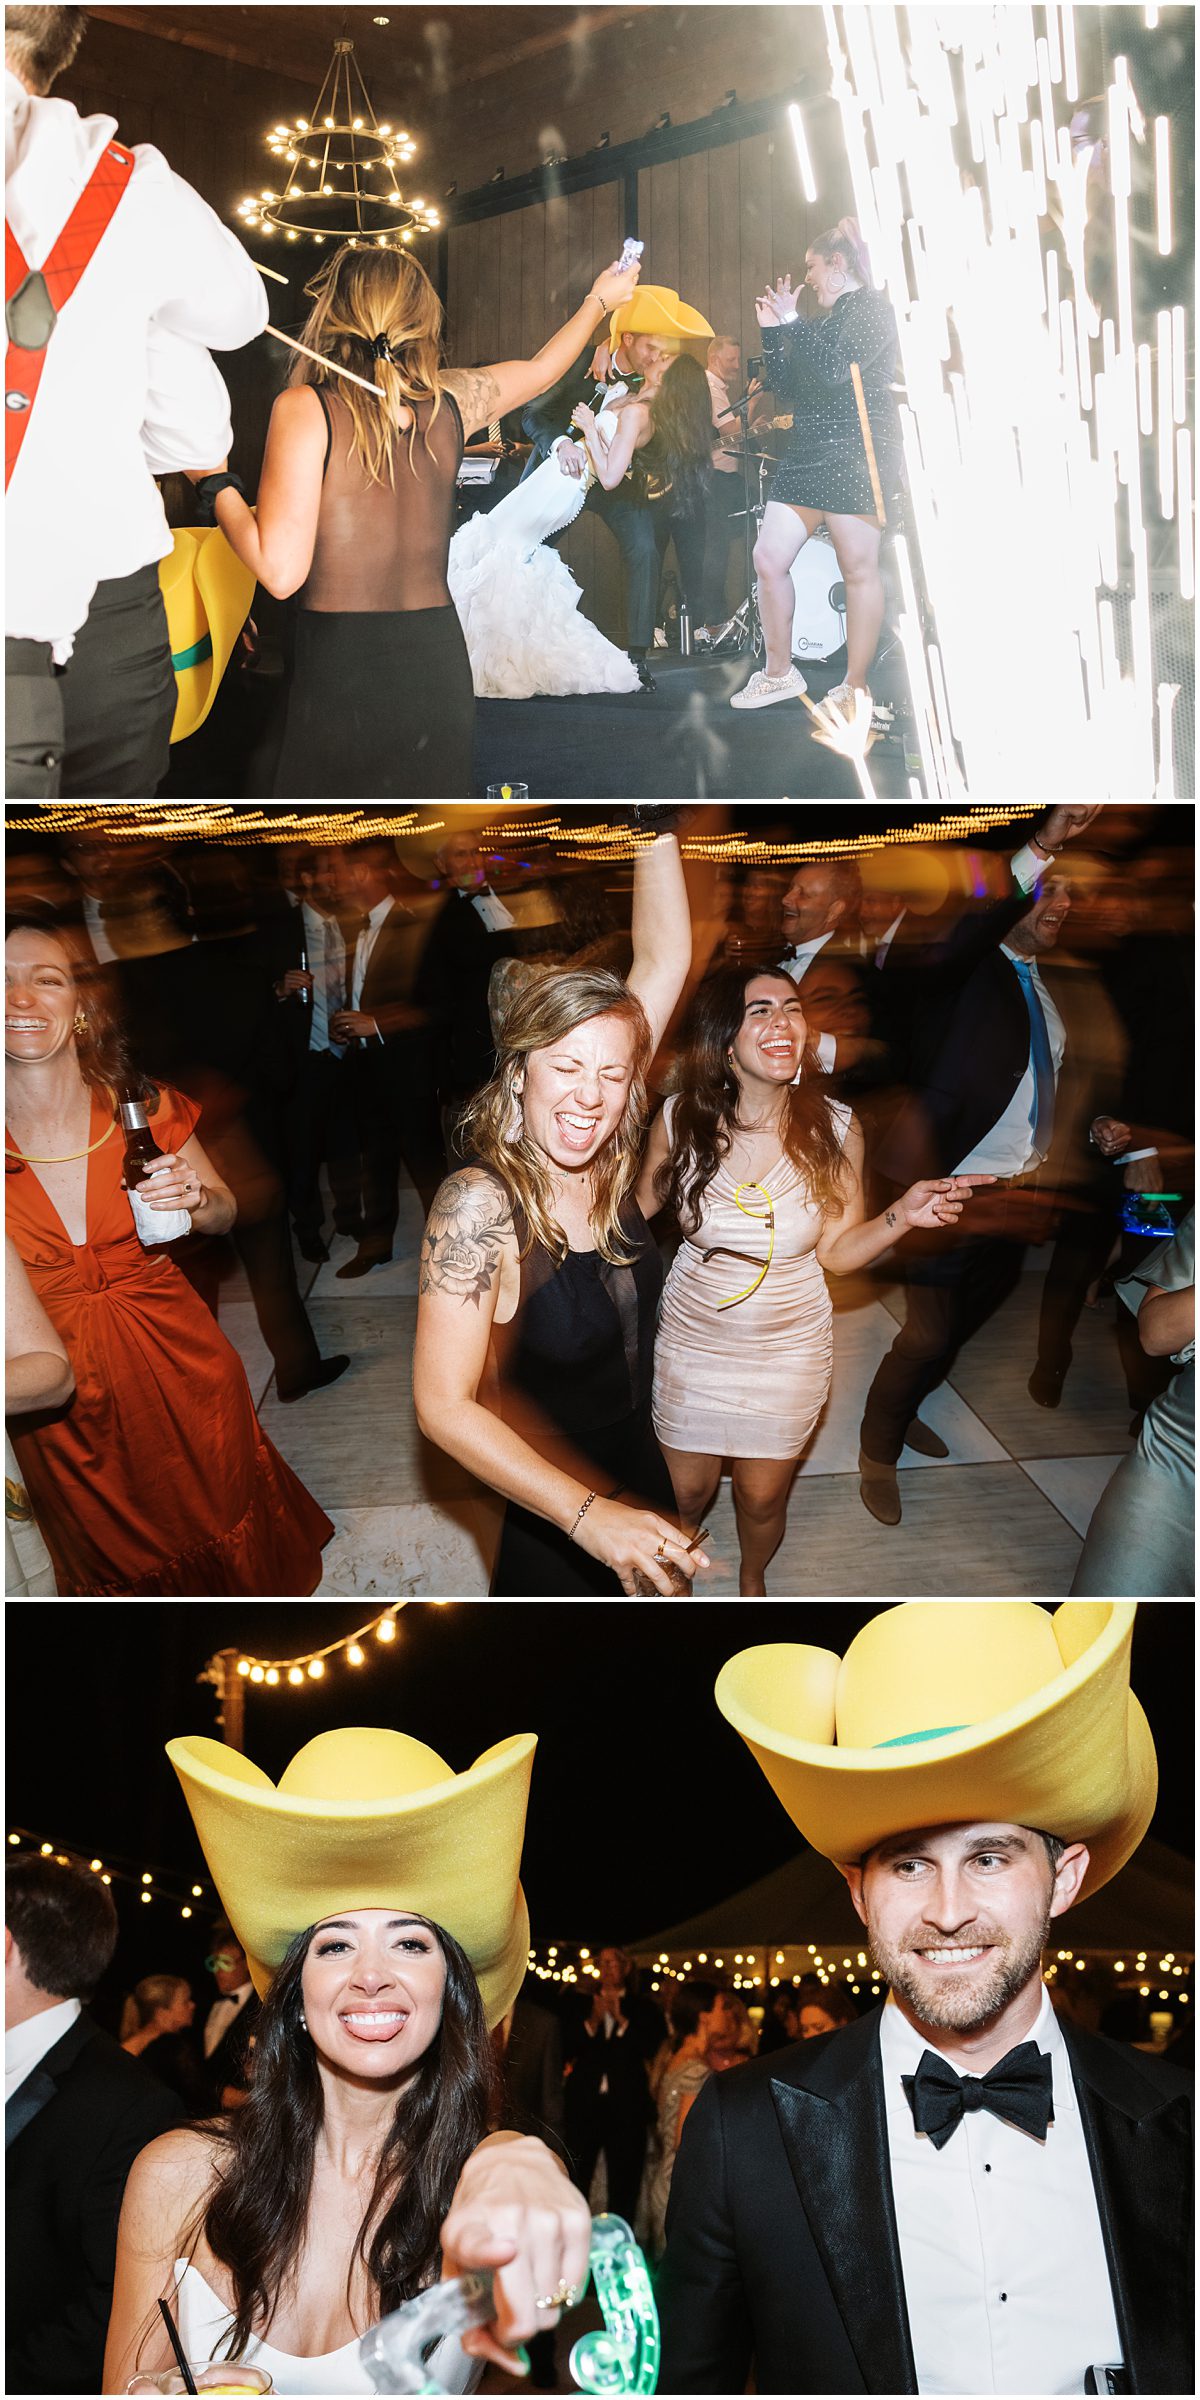 Fun-loving bride and groom don yellow cowboy hats while dancing at their wedding reception at Mountaintop Golf and Lake Club